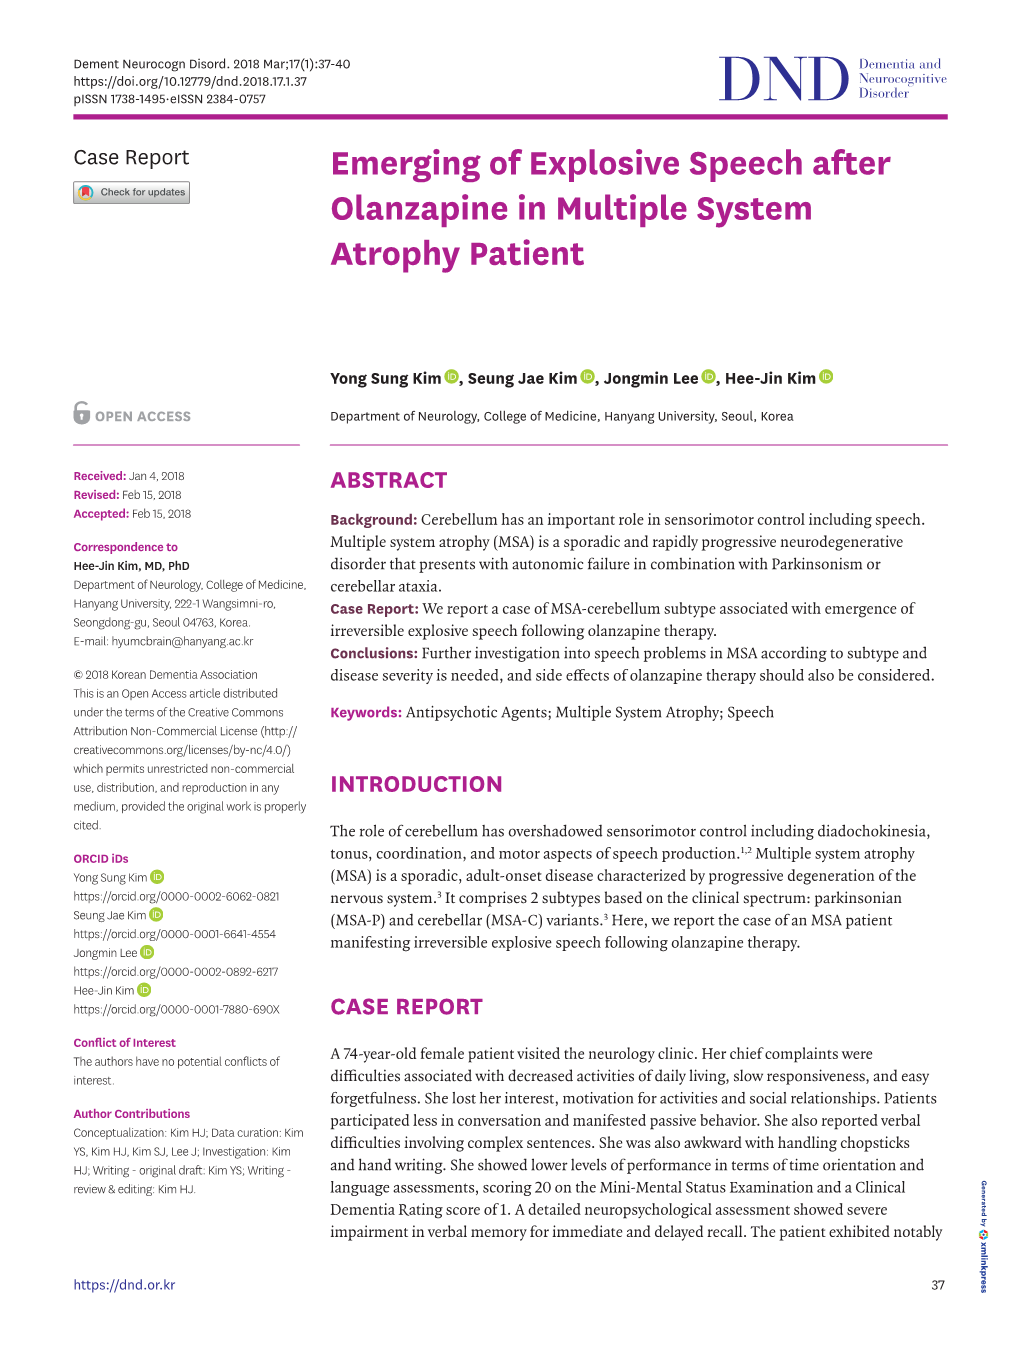 Emerging of Explosive Speech After Olanzapine in Multiple System Atrophy Patient